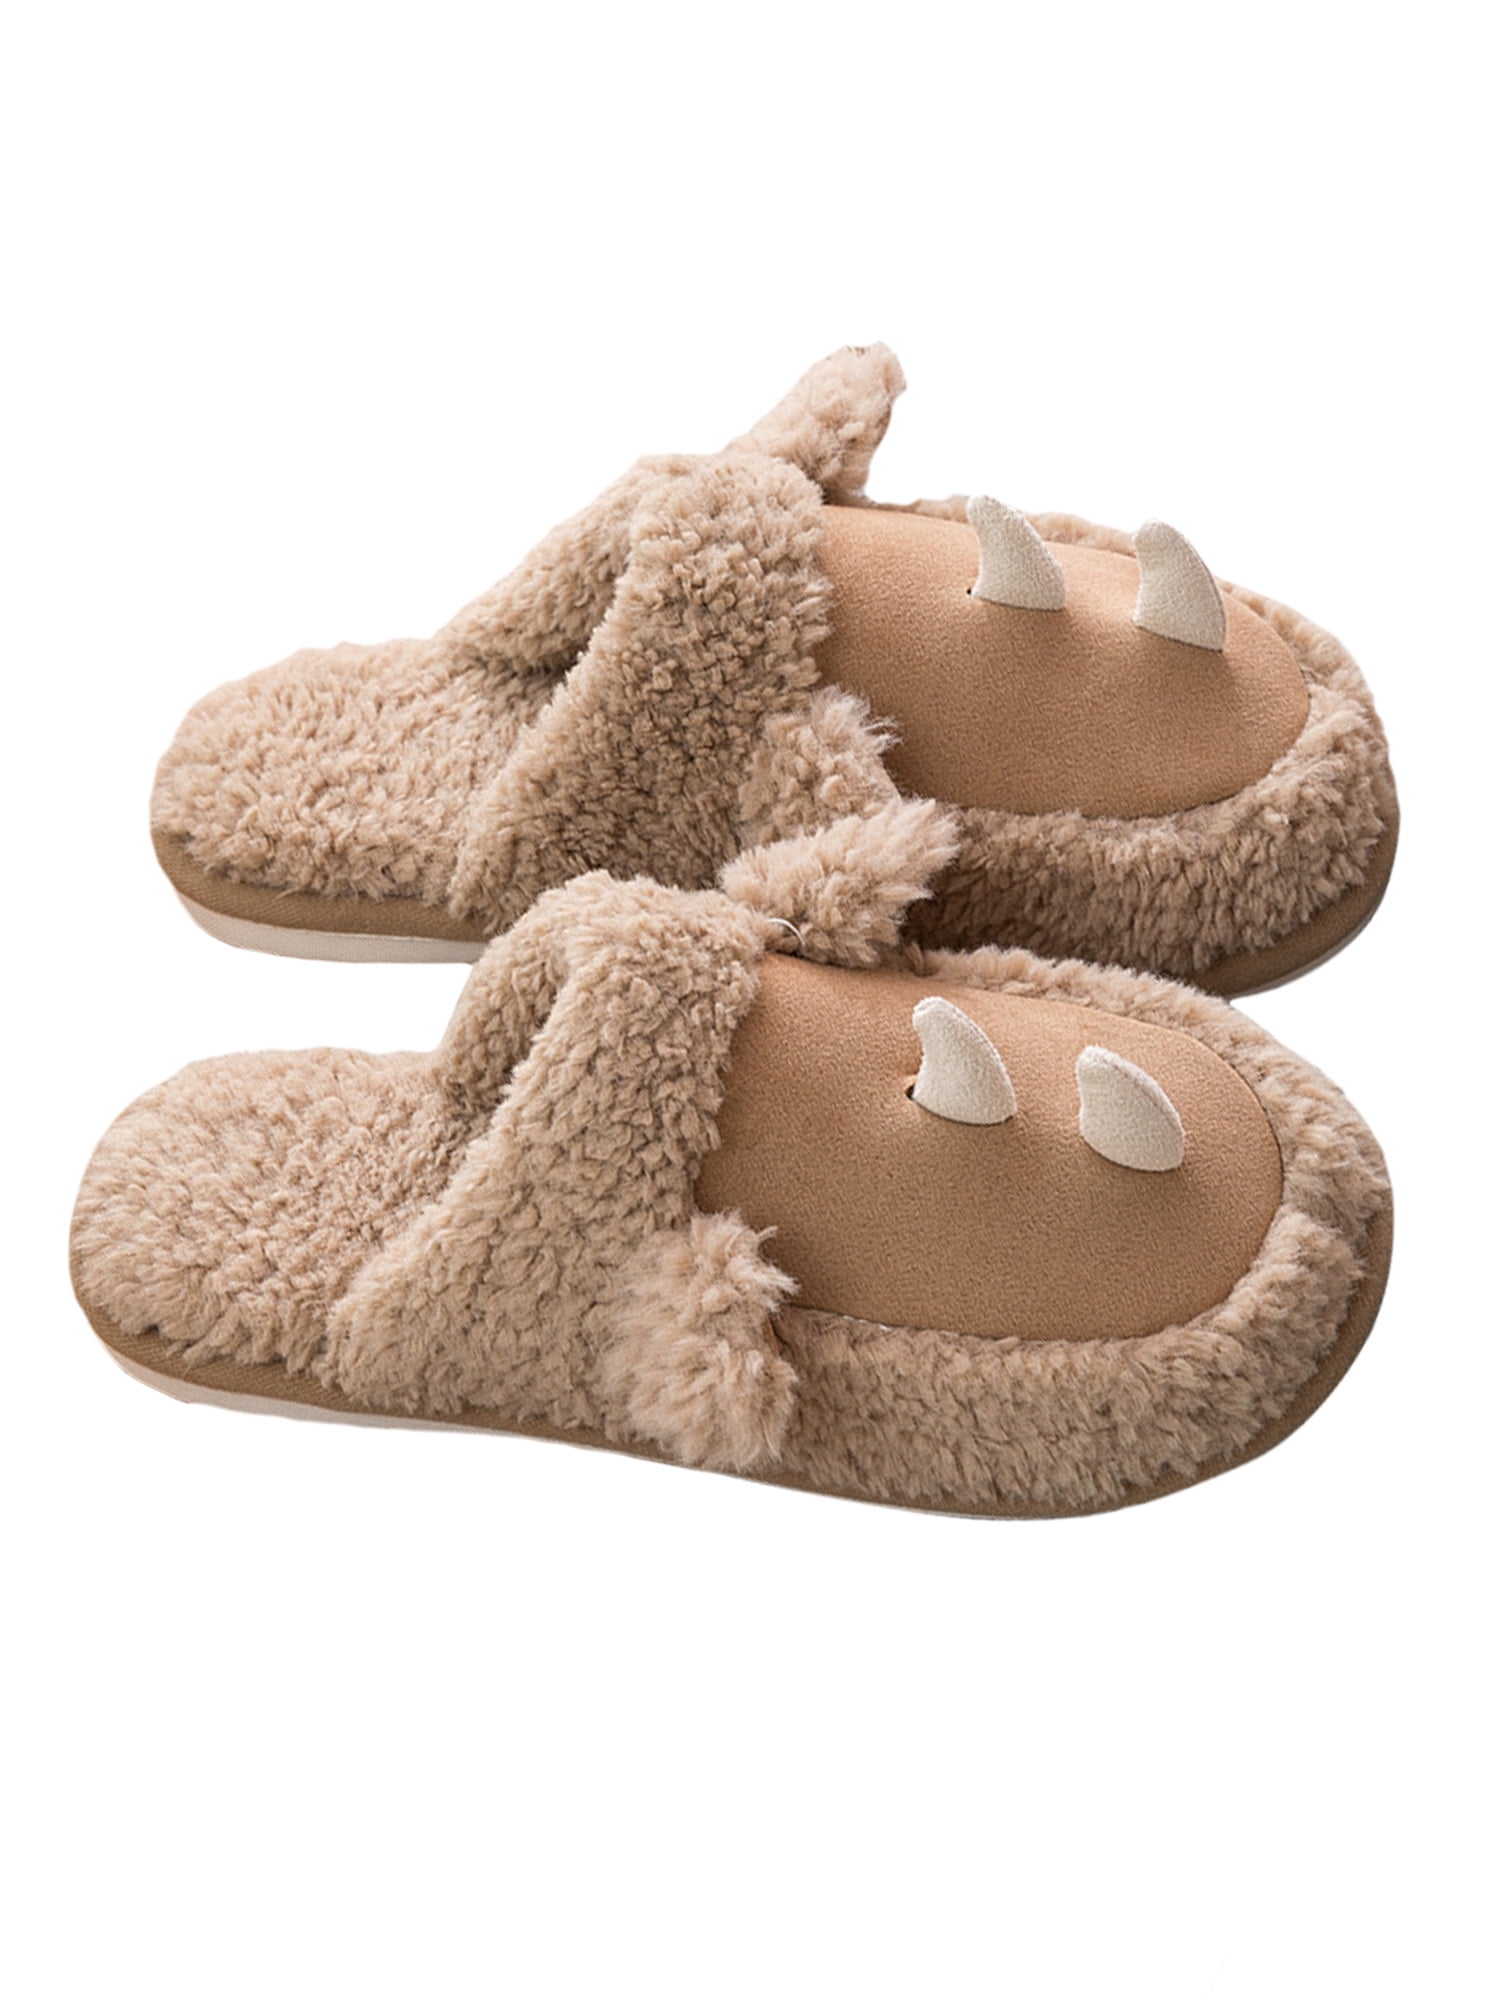 136 Soft Furry Fluff Warm Comfy Men Winter Slippers Home Indoor Shoes Brown Sz 7 